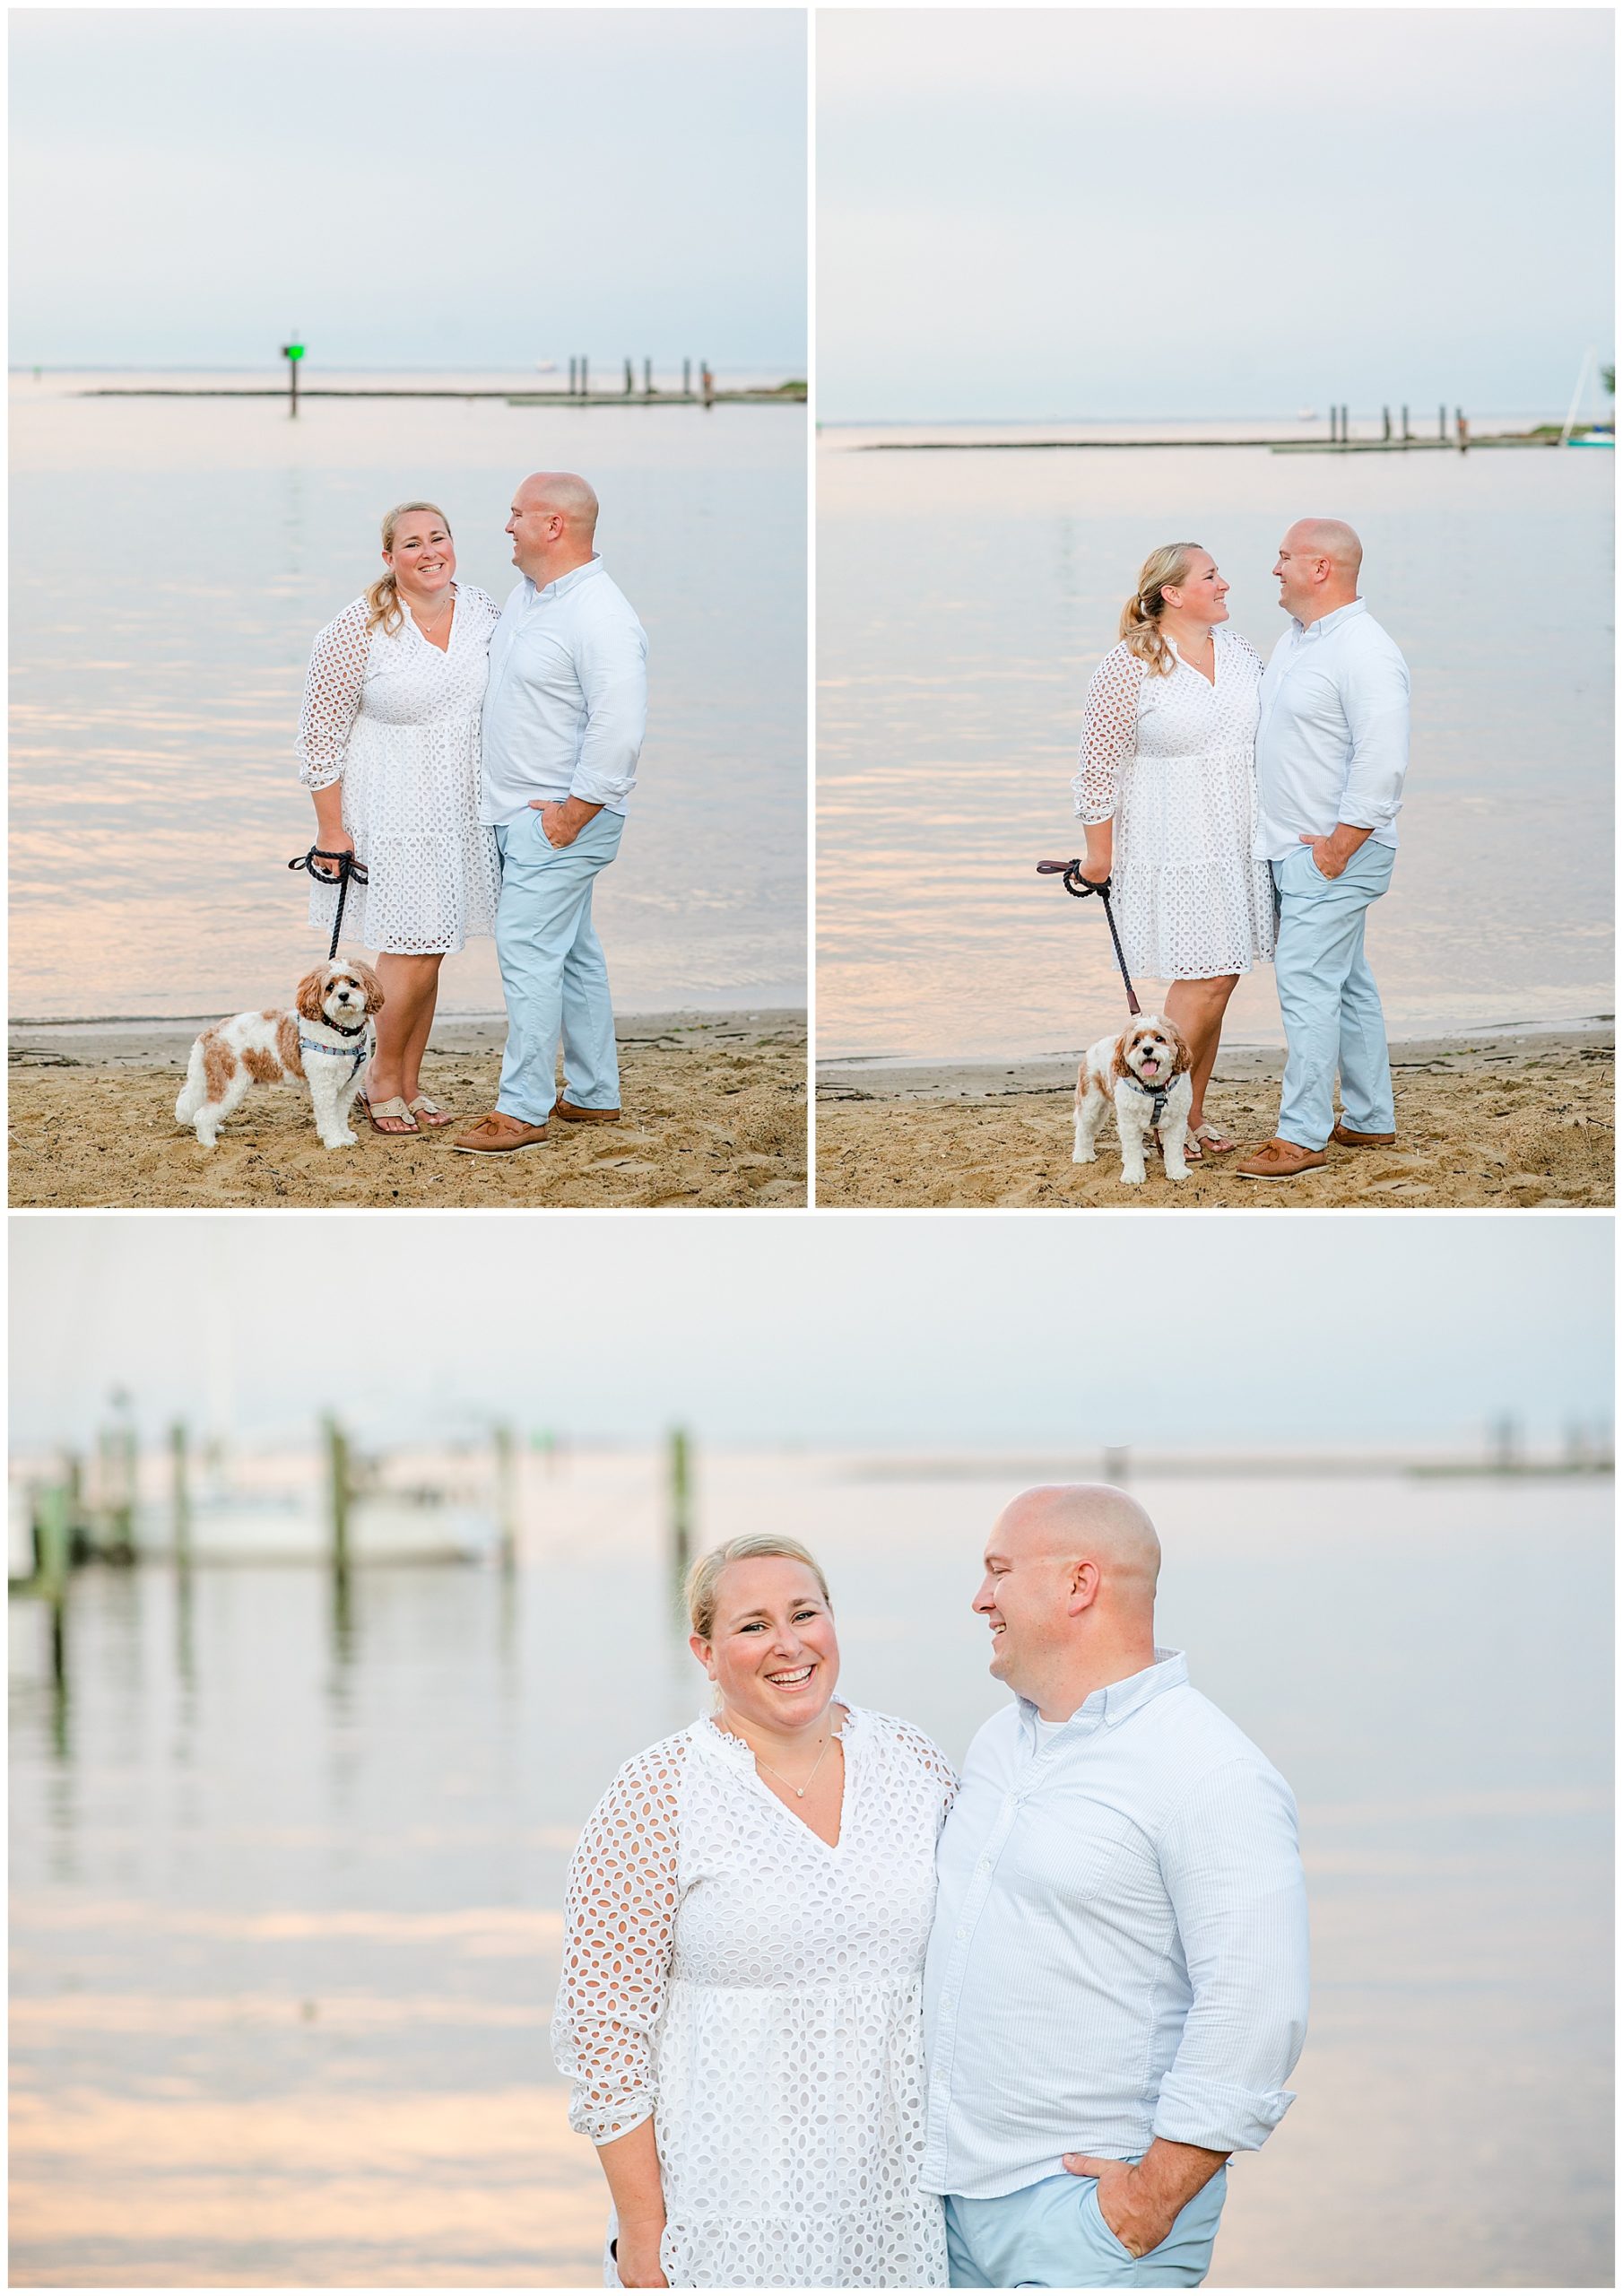 late spring Annapolis engagement photos, nautical engagement photos, Annapolis Maryland, Maryland engagement photos, MD wedding photographer, MD engagement photos, all American engagement photos, downtown Annapolis engagement photos, Annapolis photographer, Rachel E.H. Photography, summer engagement photos, casual engagement photos, waterfront engagement photos, Eastport engagement photos, beachfront engagement photos